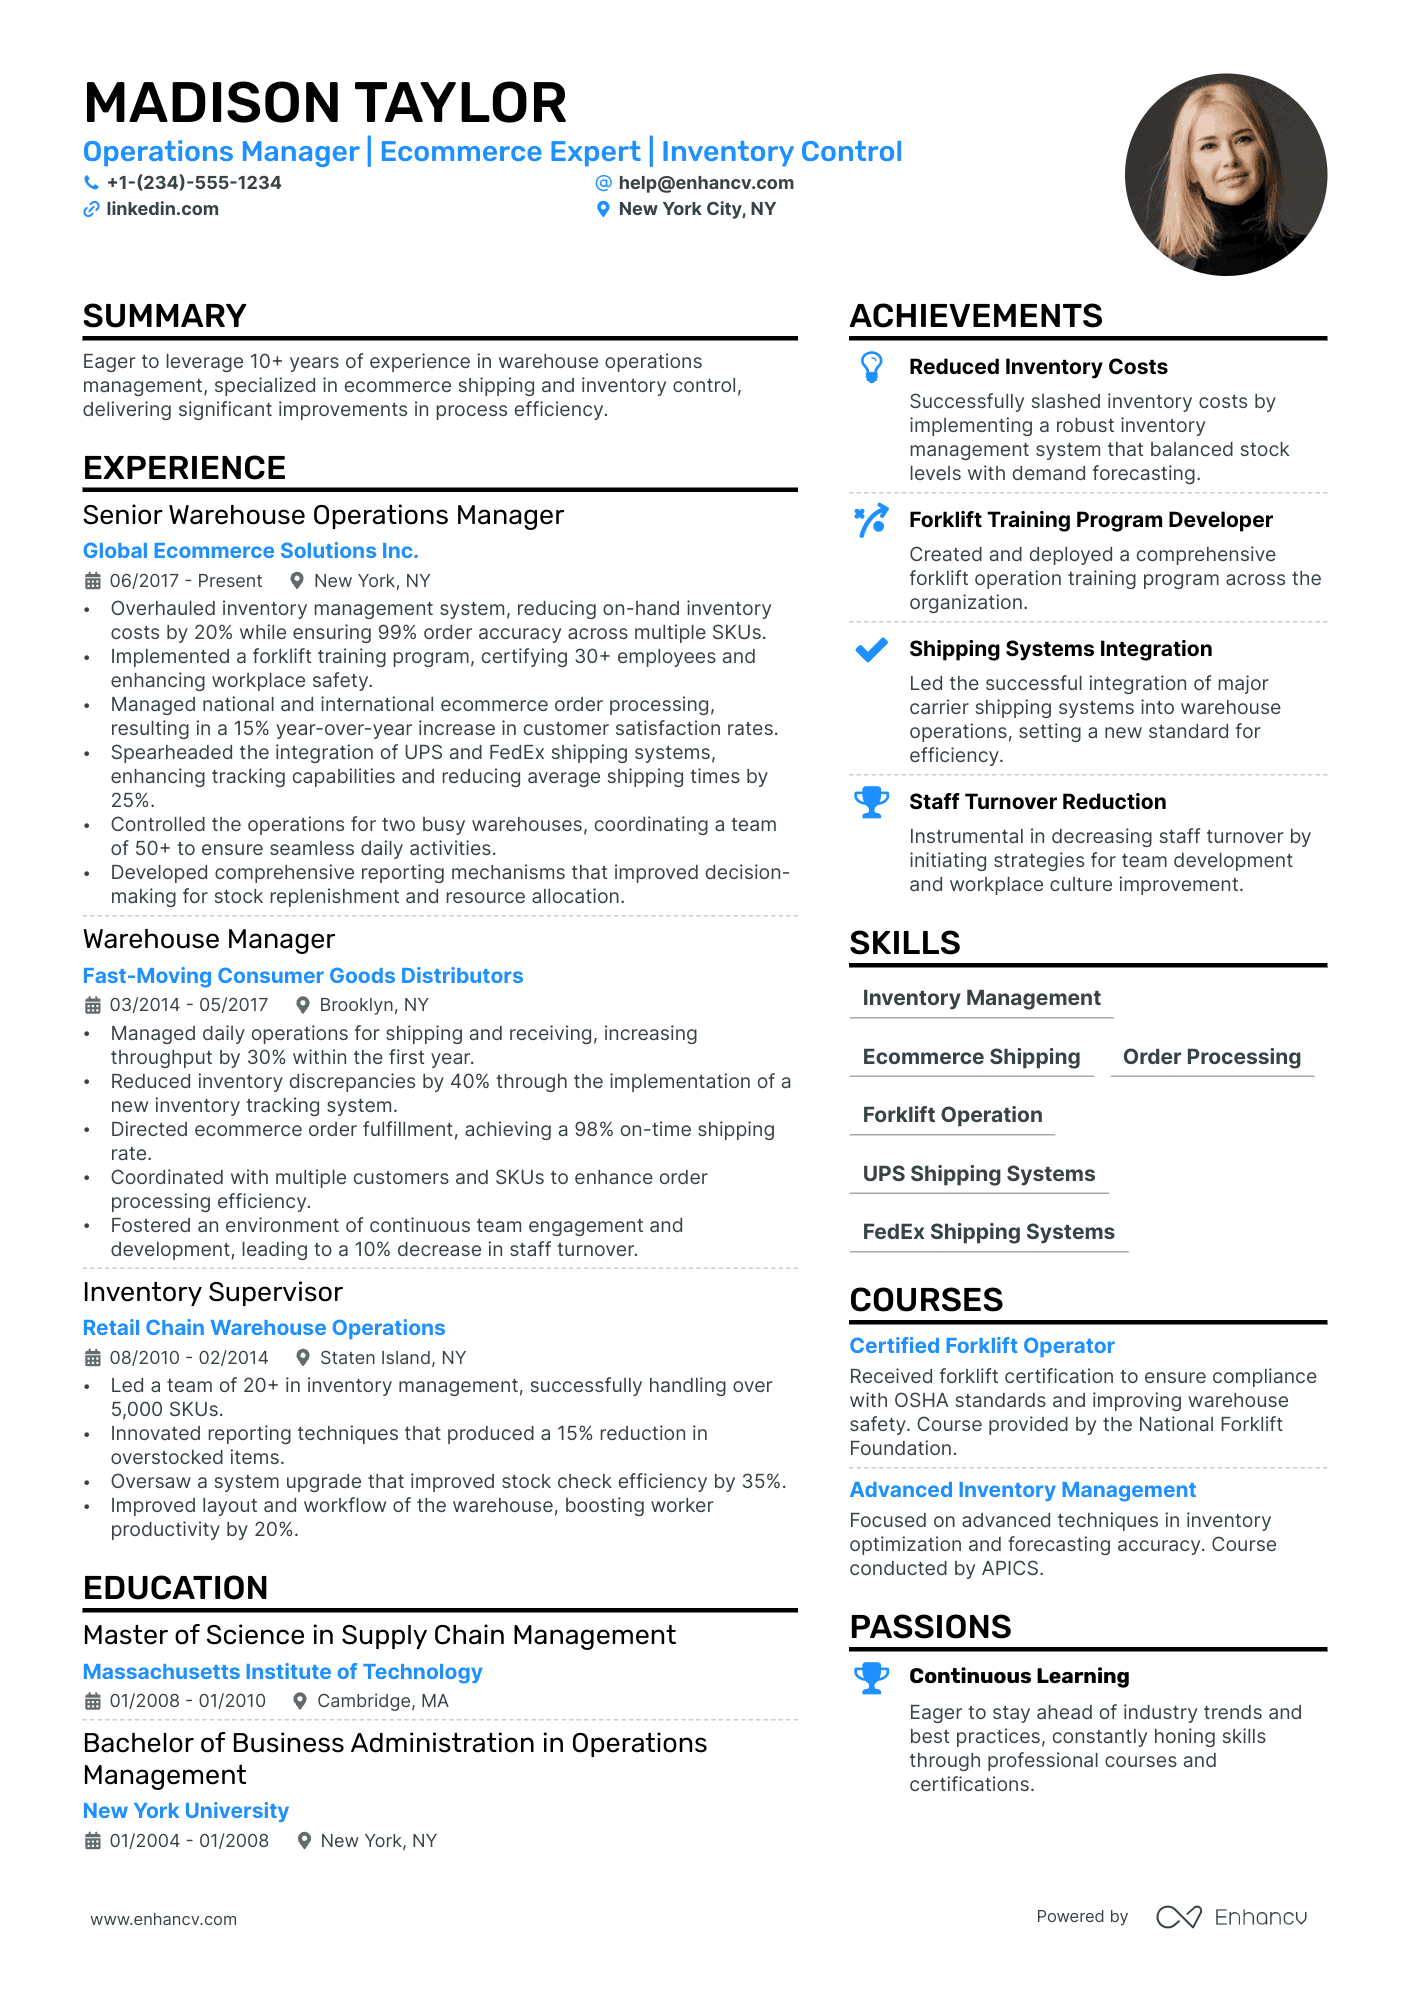 summary of qualifications resume for warehouse worker